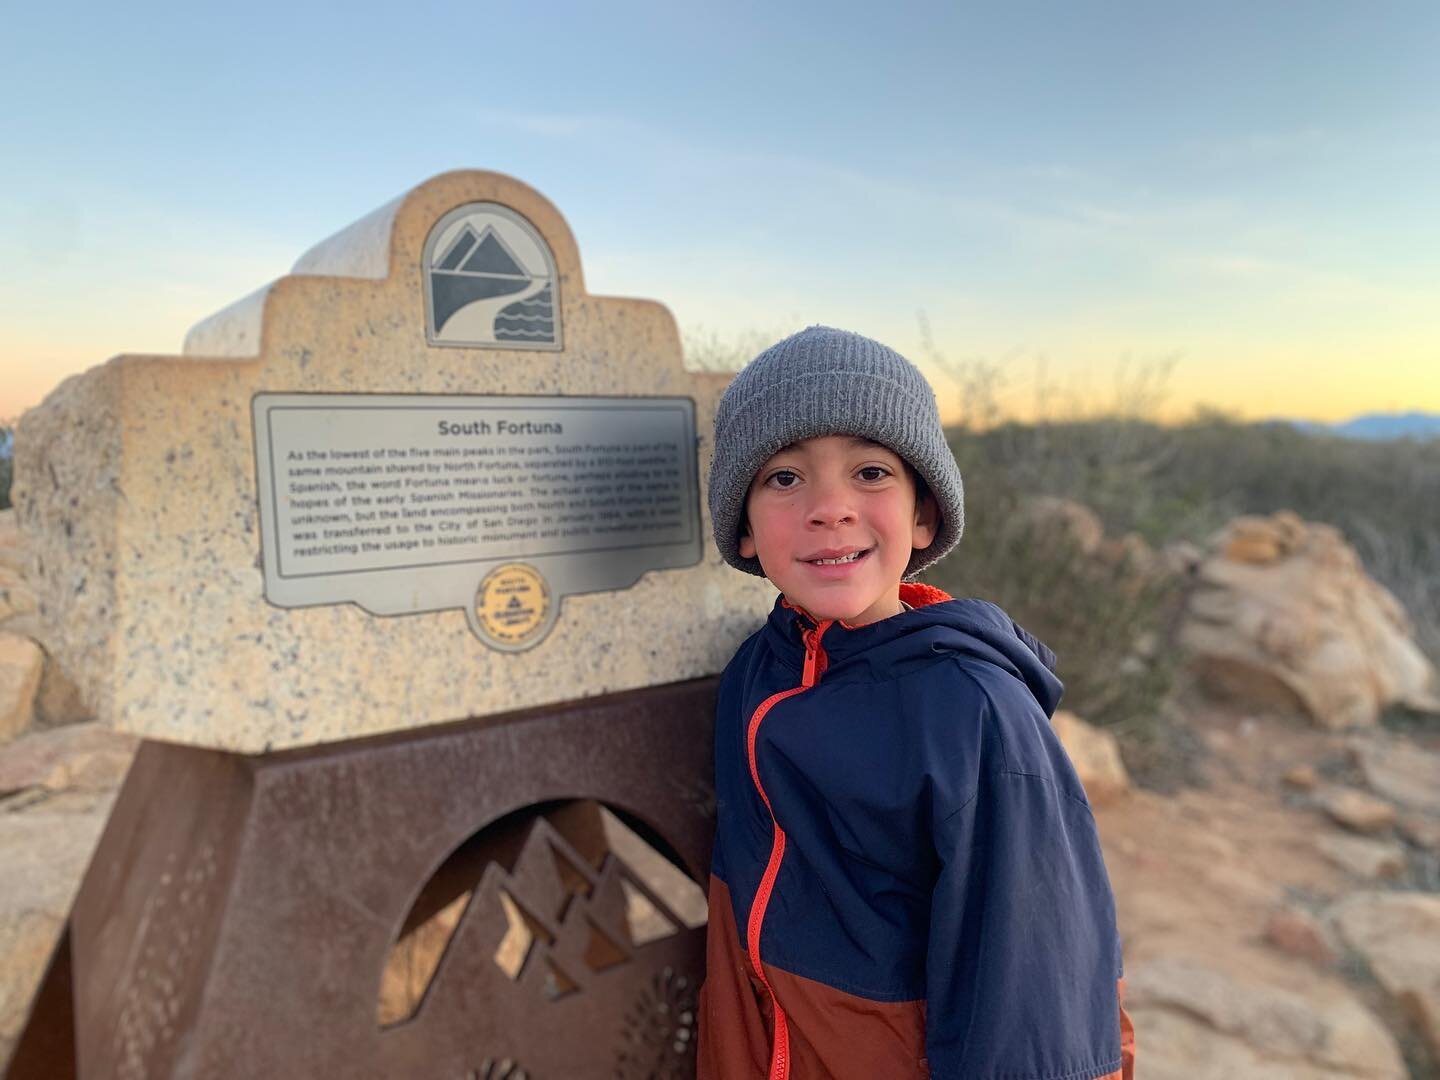 Six year old Dorian is currently raising money to support @radychildrens and @rmhcsc by taking on the five peaks challenge and hiking all five peaks of @missiontrails_regionalpark in one day! Support his cause at the link below&hellip; 
https://secur